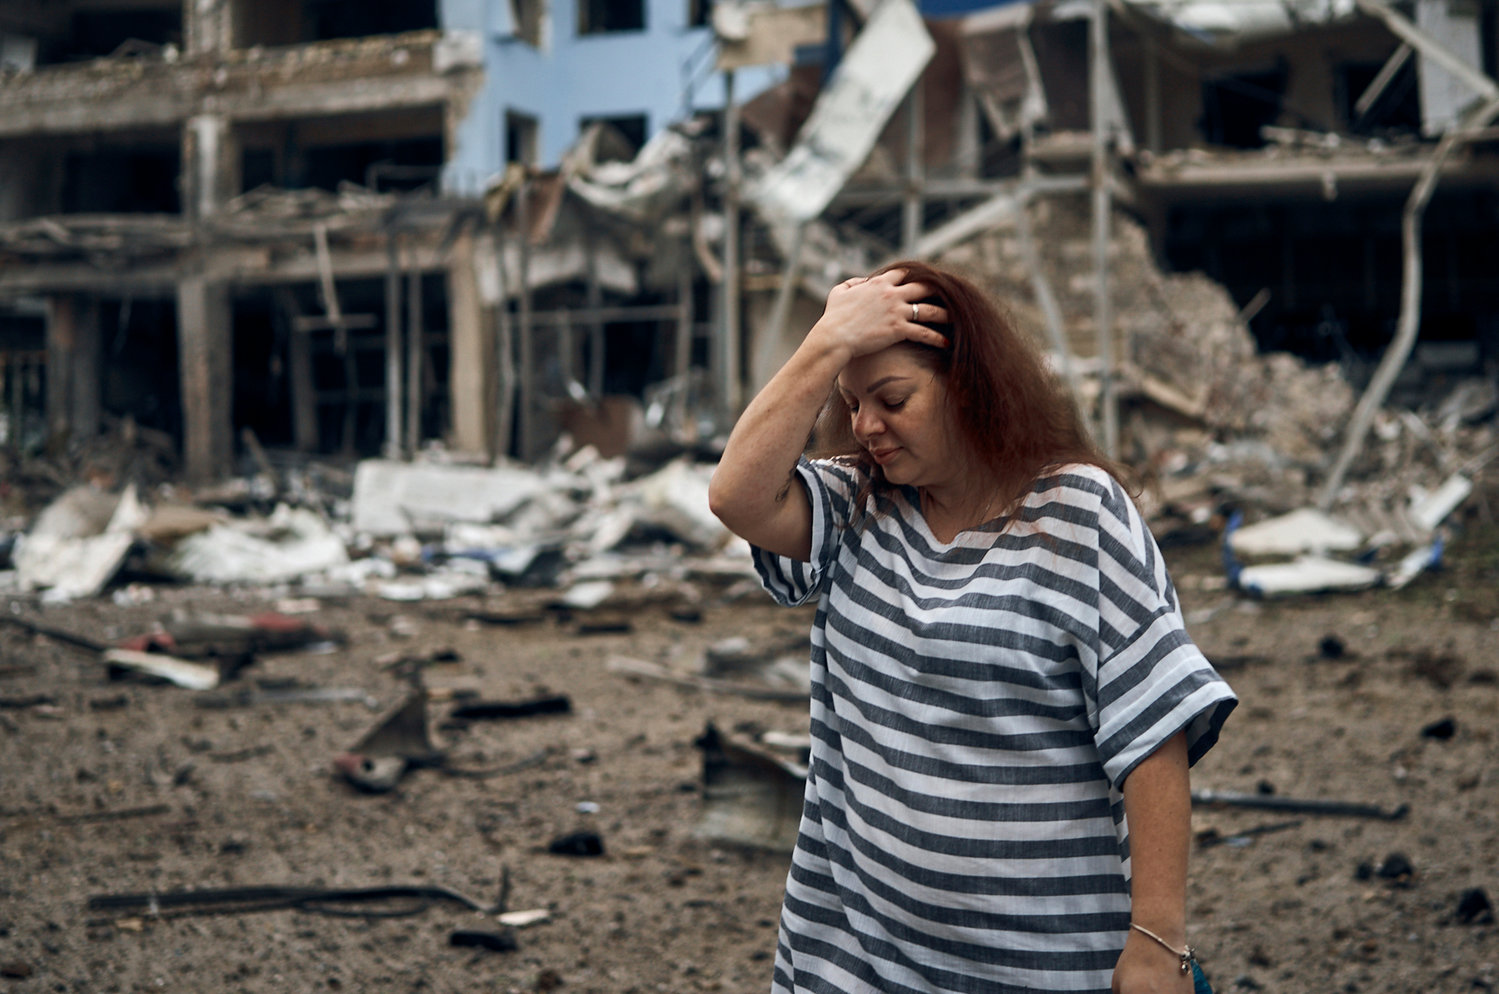 A woman stands amongst the debris after the Russian shelling in Mykolaiv, Ukraine, on Wednesday.